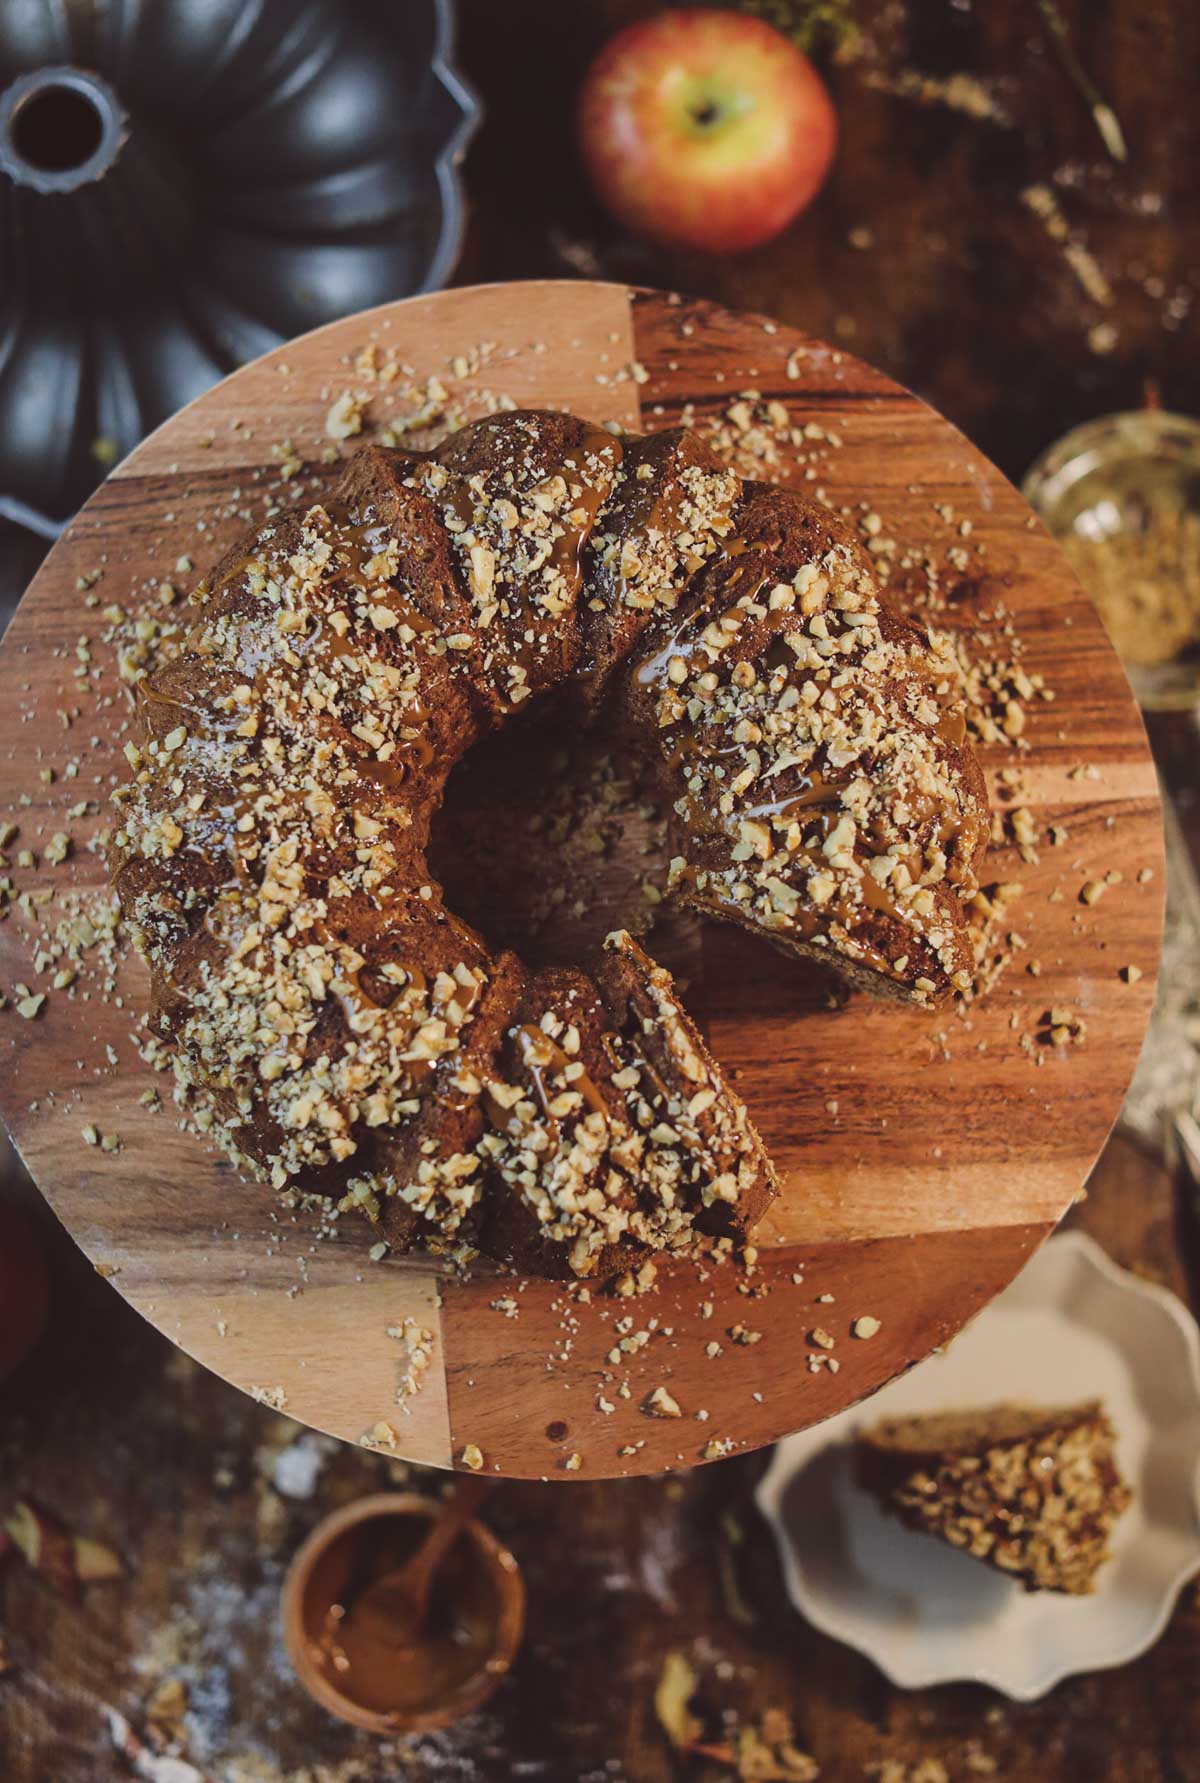 The top view of a fresh apple cake covered in dulce de leche caramel and crushed nuts. It is sitting on a wooden cake stand with a slice missing.